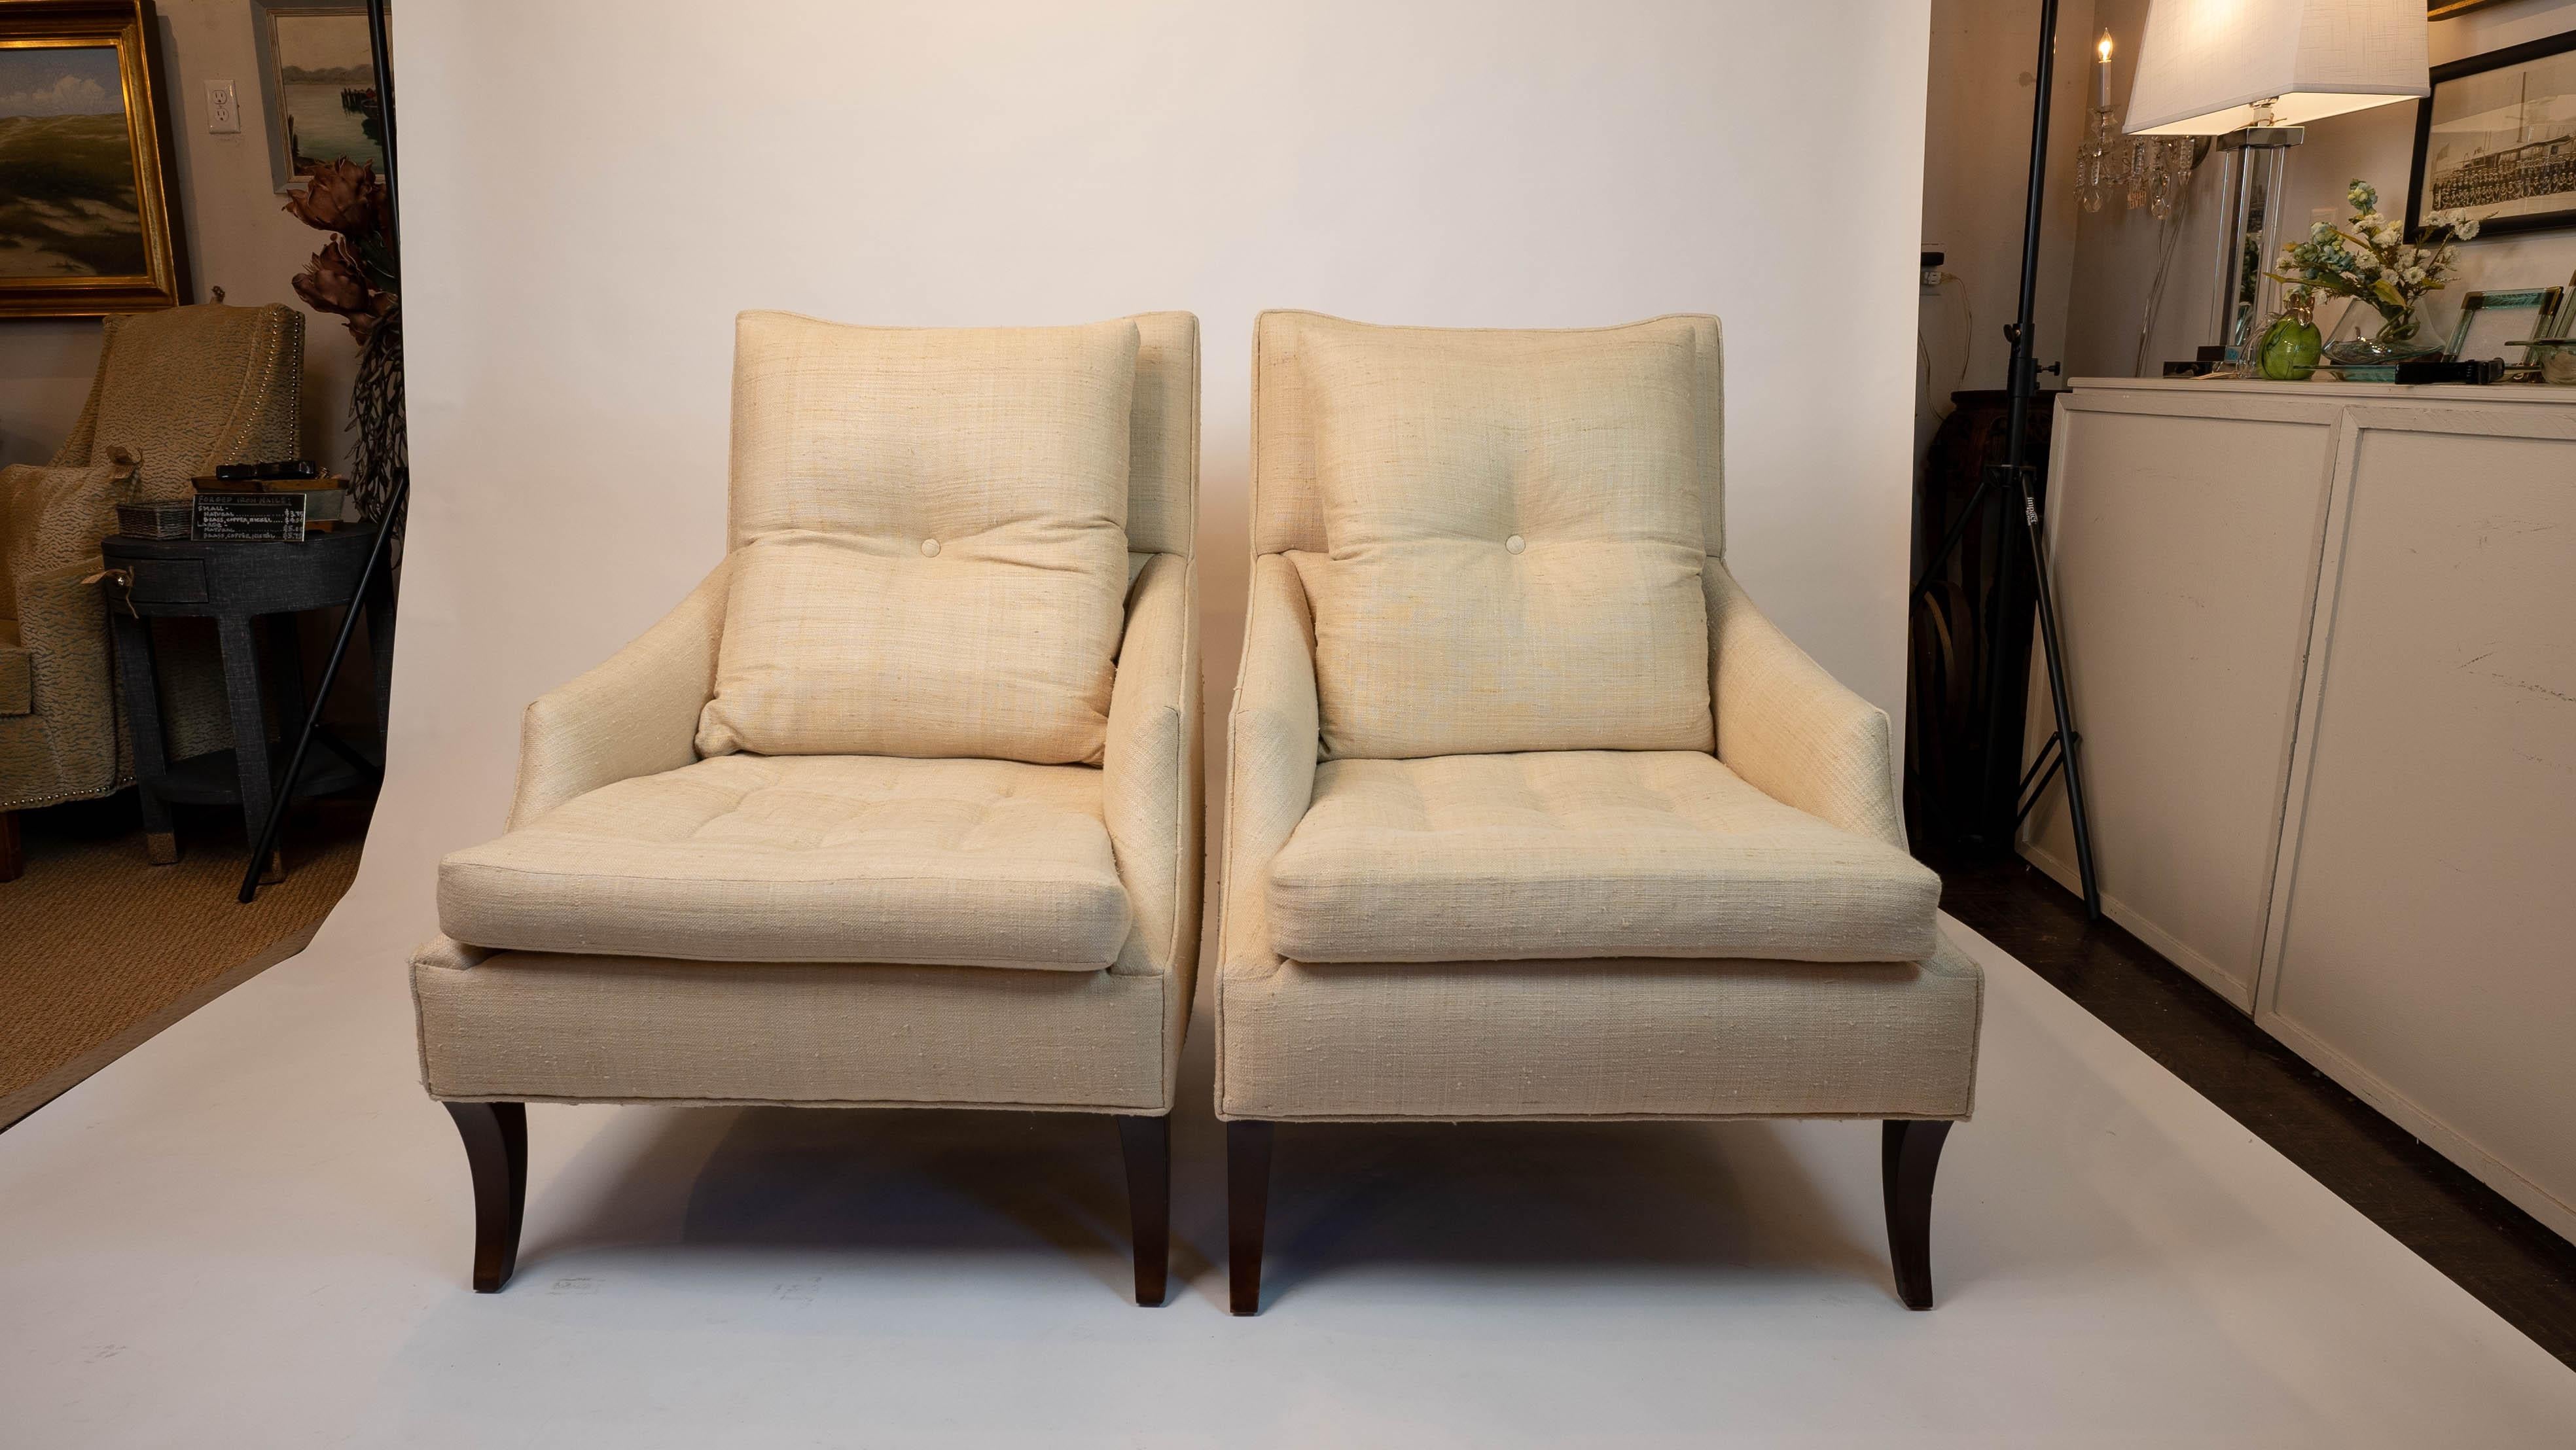 Pair of top-quality, high-end, custom made club chairs with sleek design and curves. Nice tufting details on seat and back cushions, as well as a special tufted button detail on each chair’s back. Seat and back cushions are each unattached, and